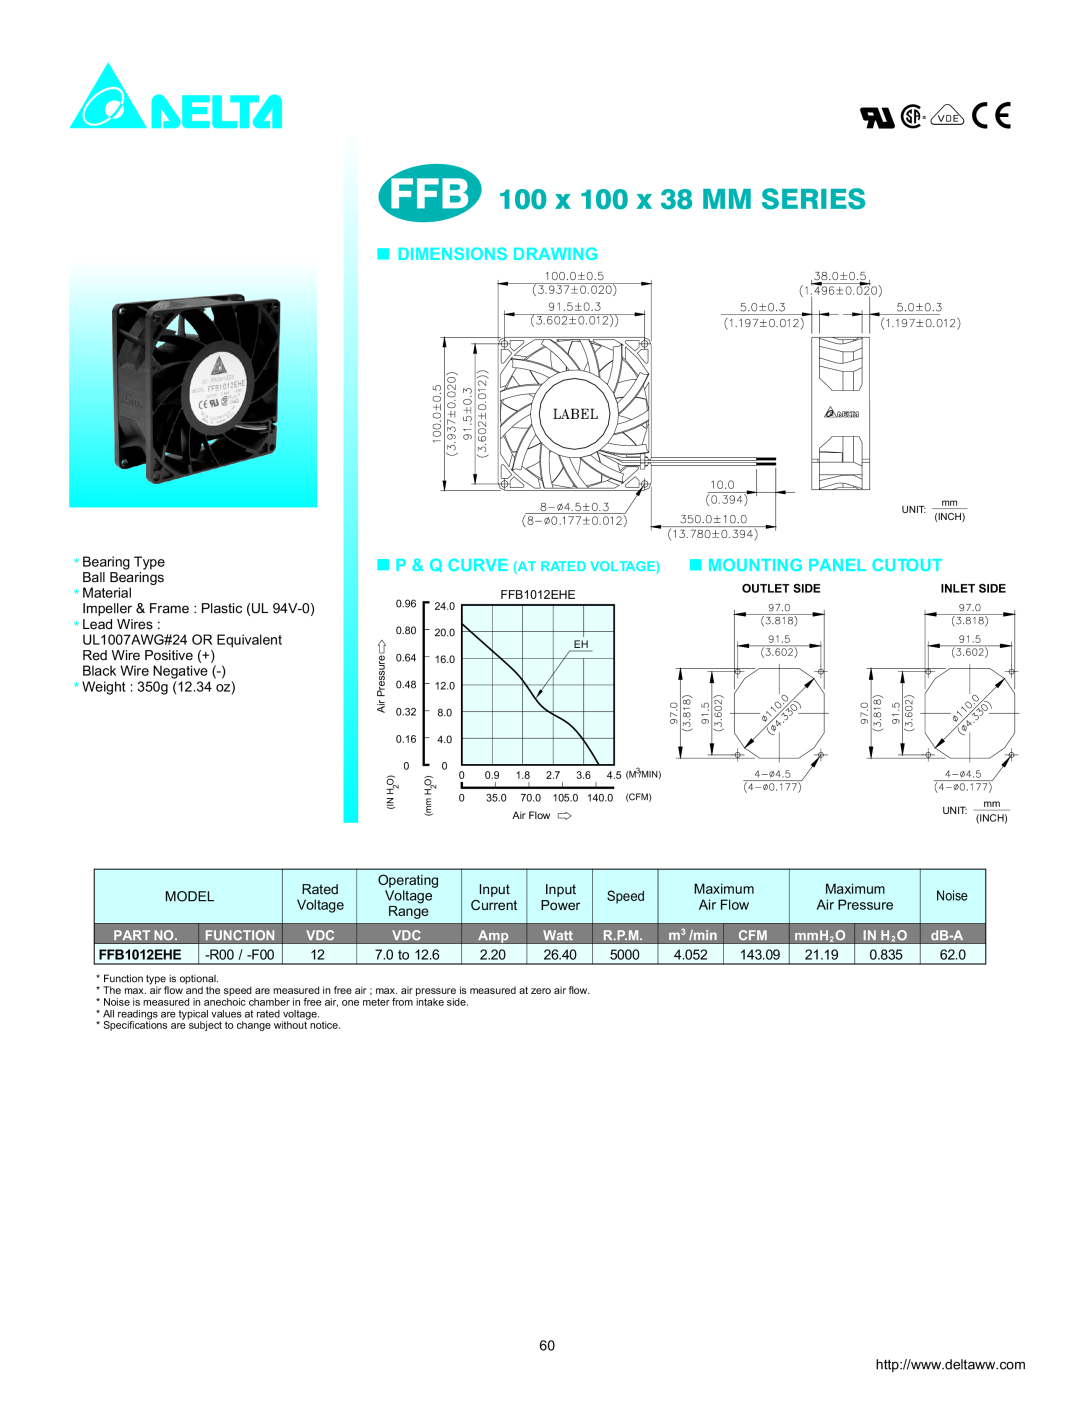 Delta Electronics FFB1012EHE dimensions FFB 100 x 100 x 38 MM SERIES, Dimensions Drawing, Mounting Panel Cutout, Function 